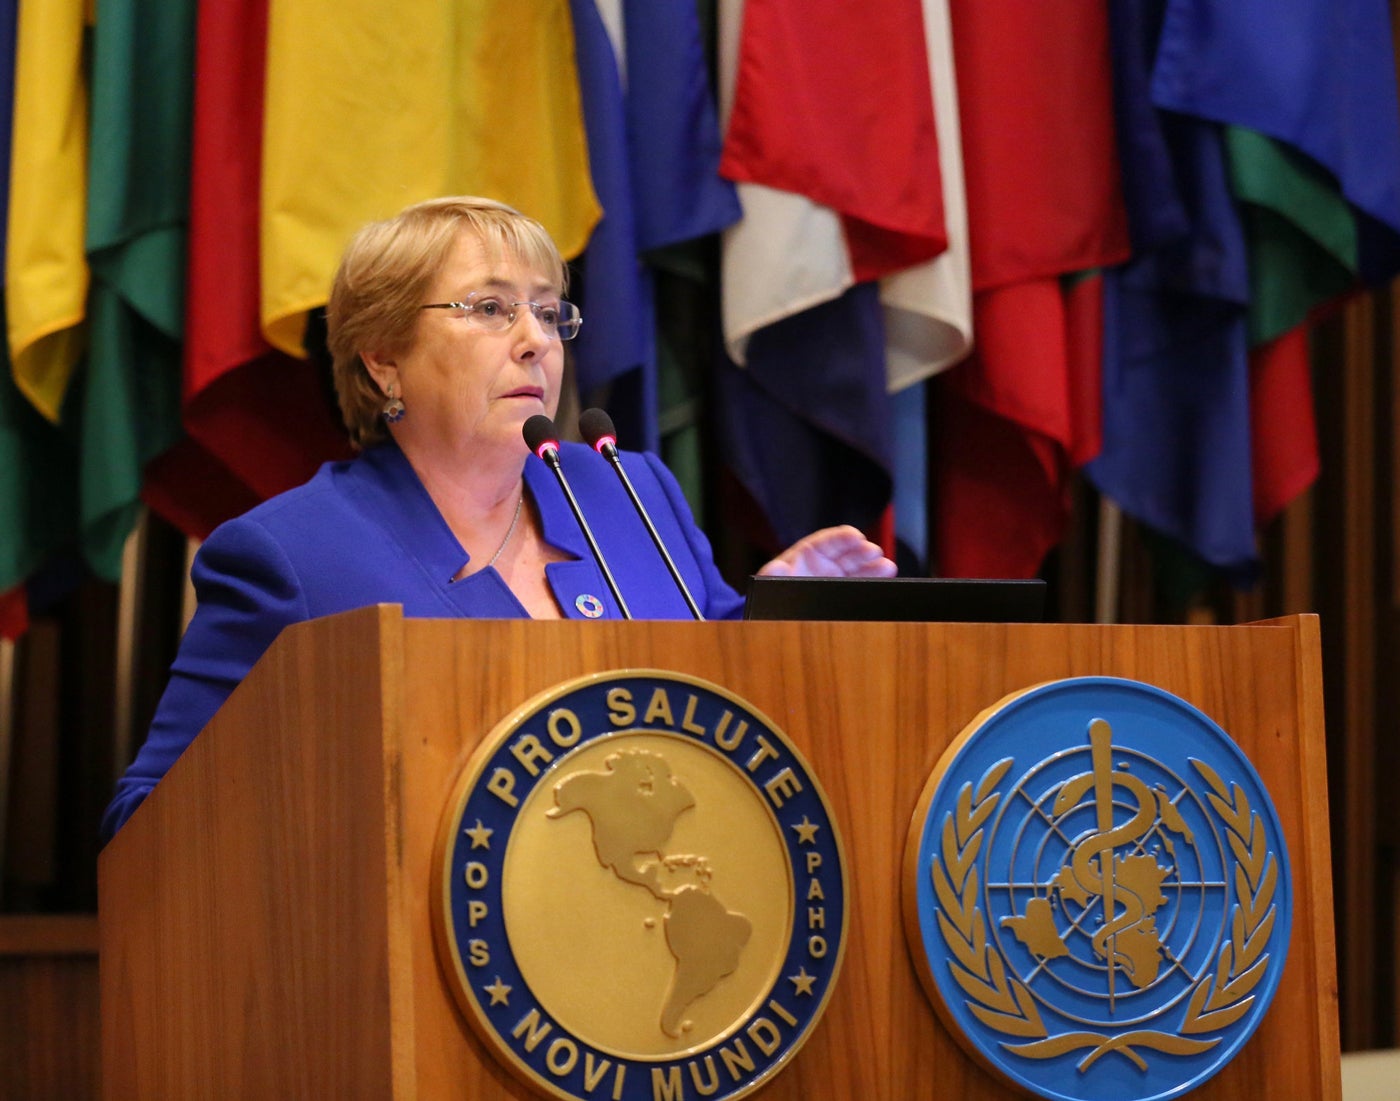 Michelle Bachelet, President of the High Level Commission on "Universal Health in the 21st Century: 40 Years of Alma-Ata